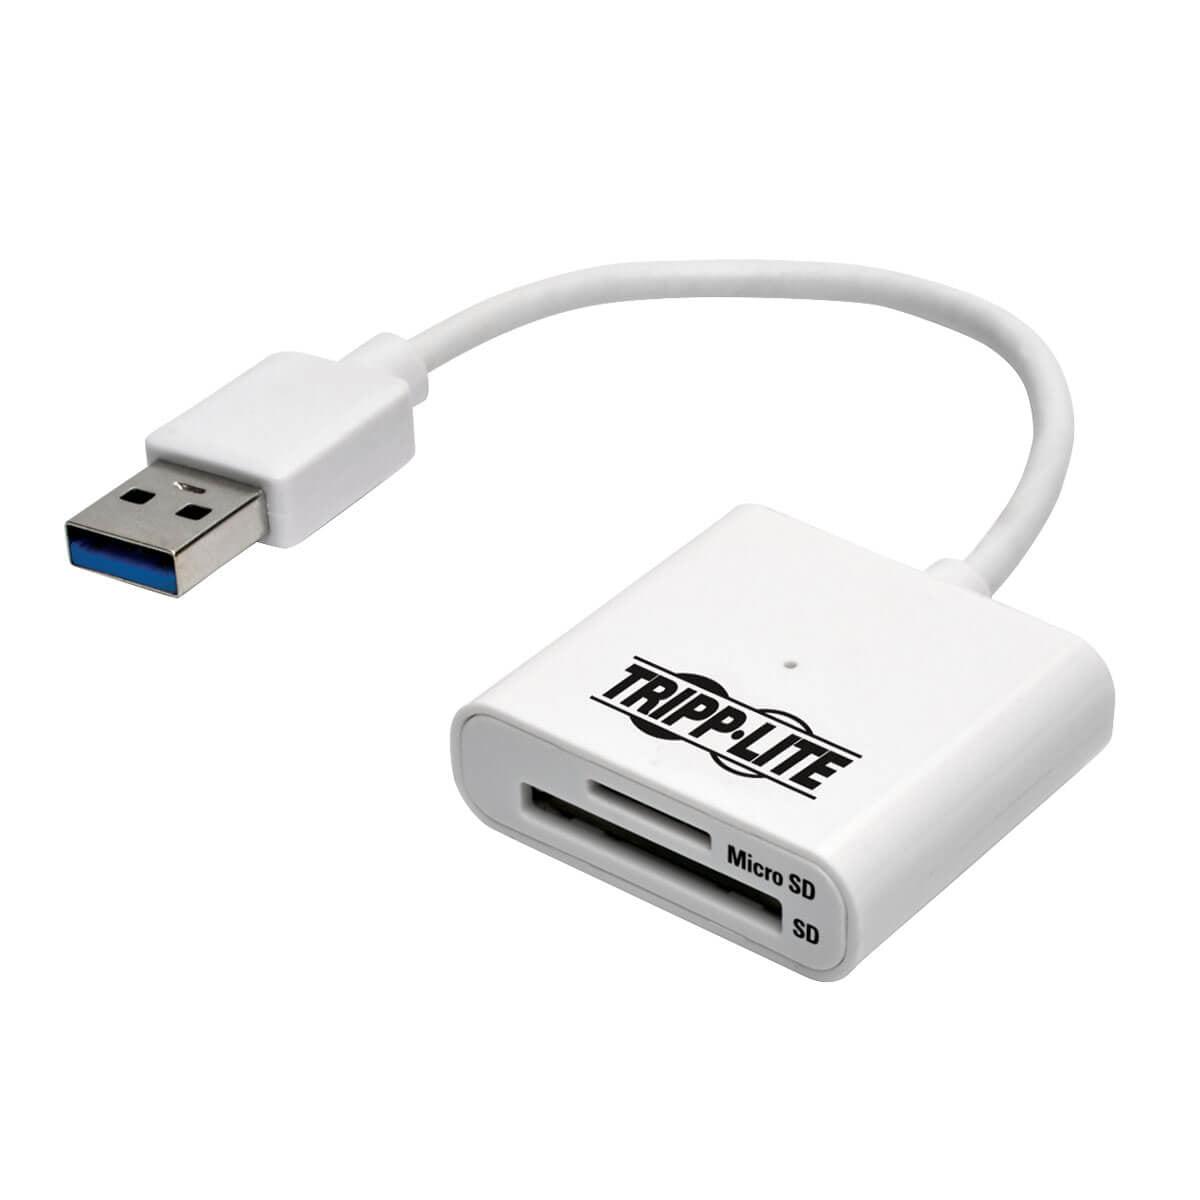 Tripp Lite U352-06N-Sd Usb 3.0 Superspeed Sd/Micro Sd Memory Card Media Reader With Built-In Cable, 6-In. (15.24 Cm)